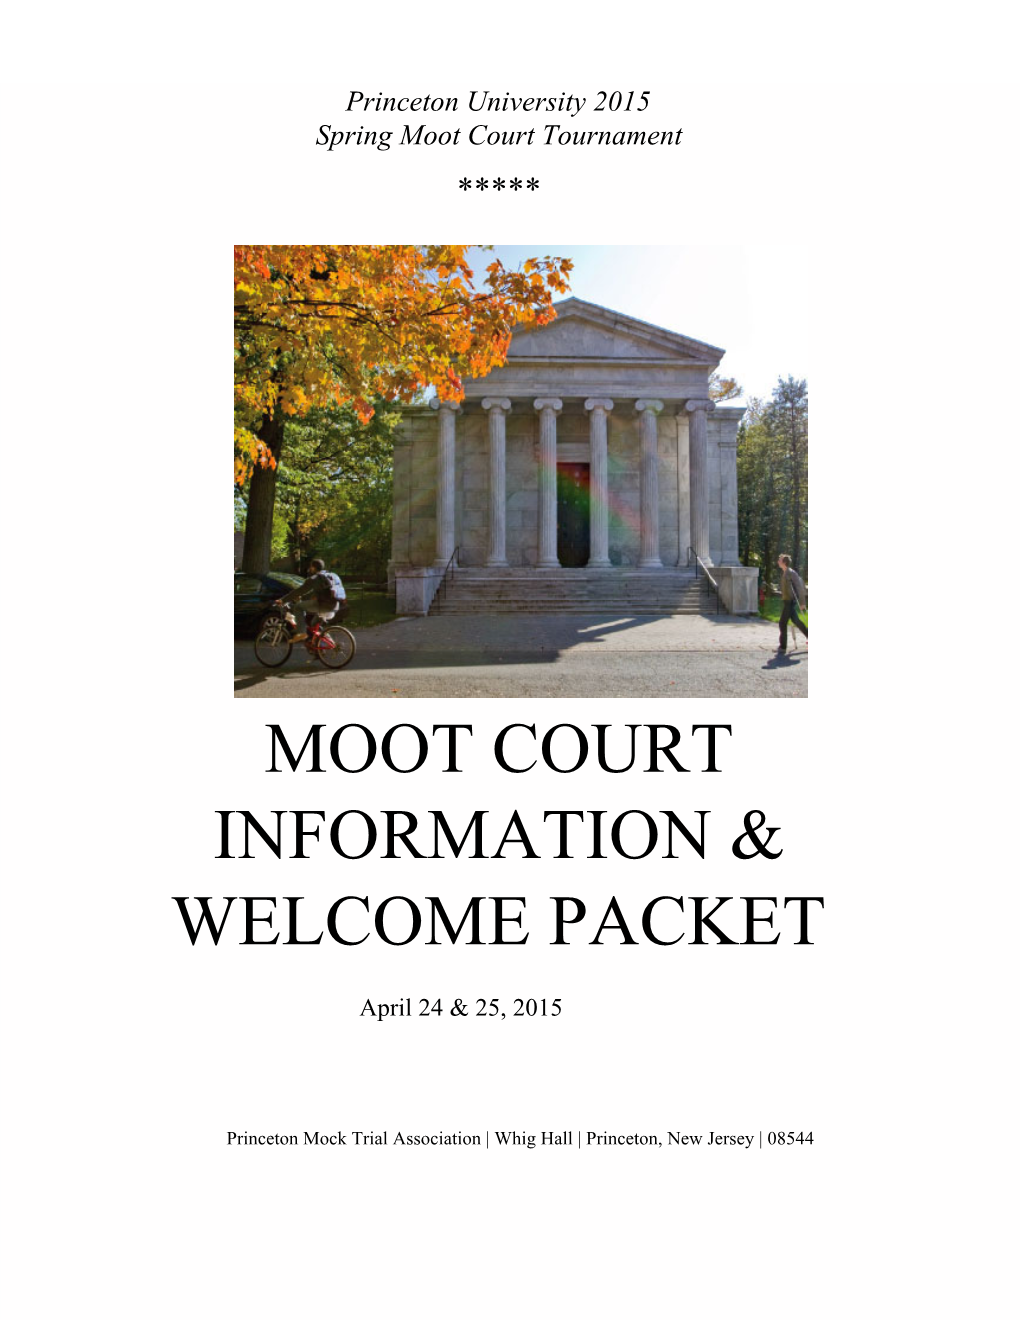 What Is Moot Court?